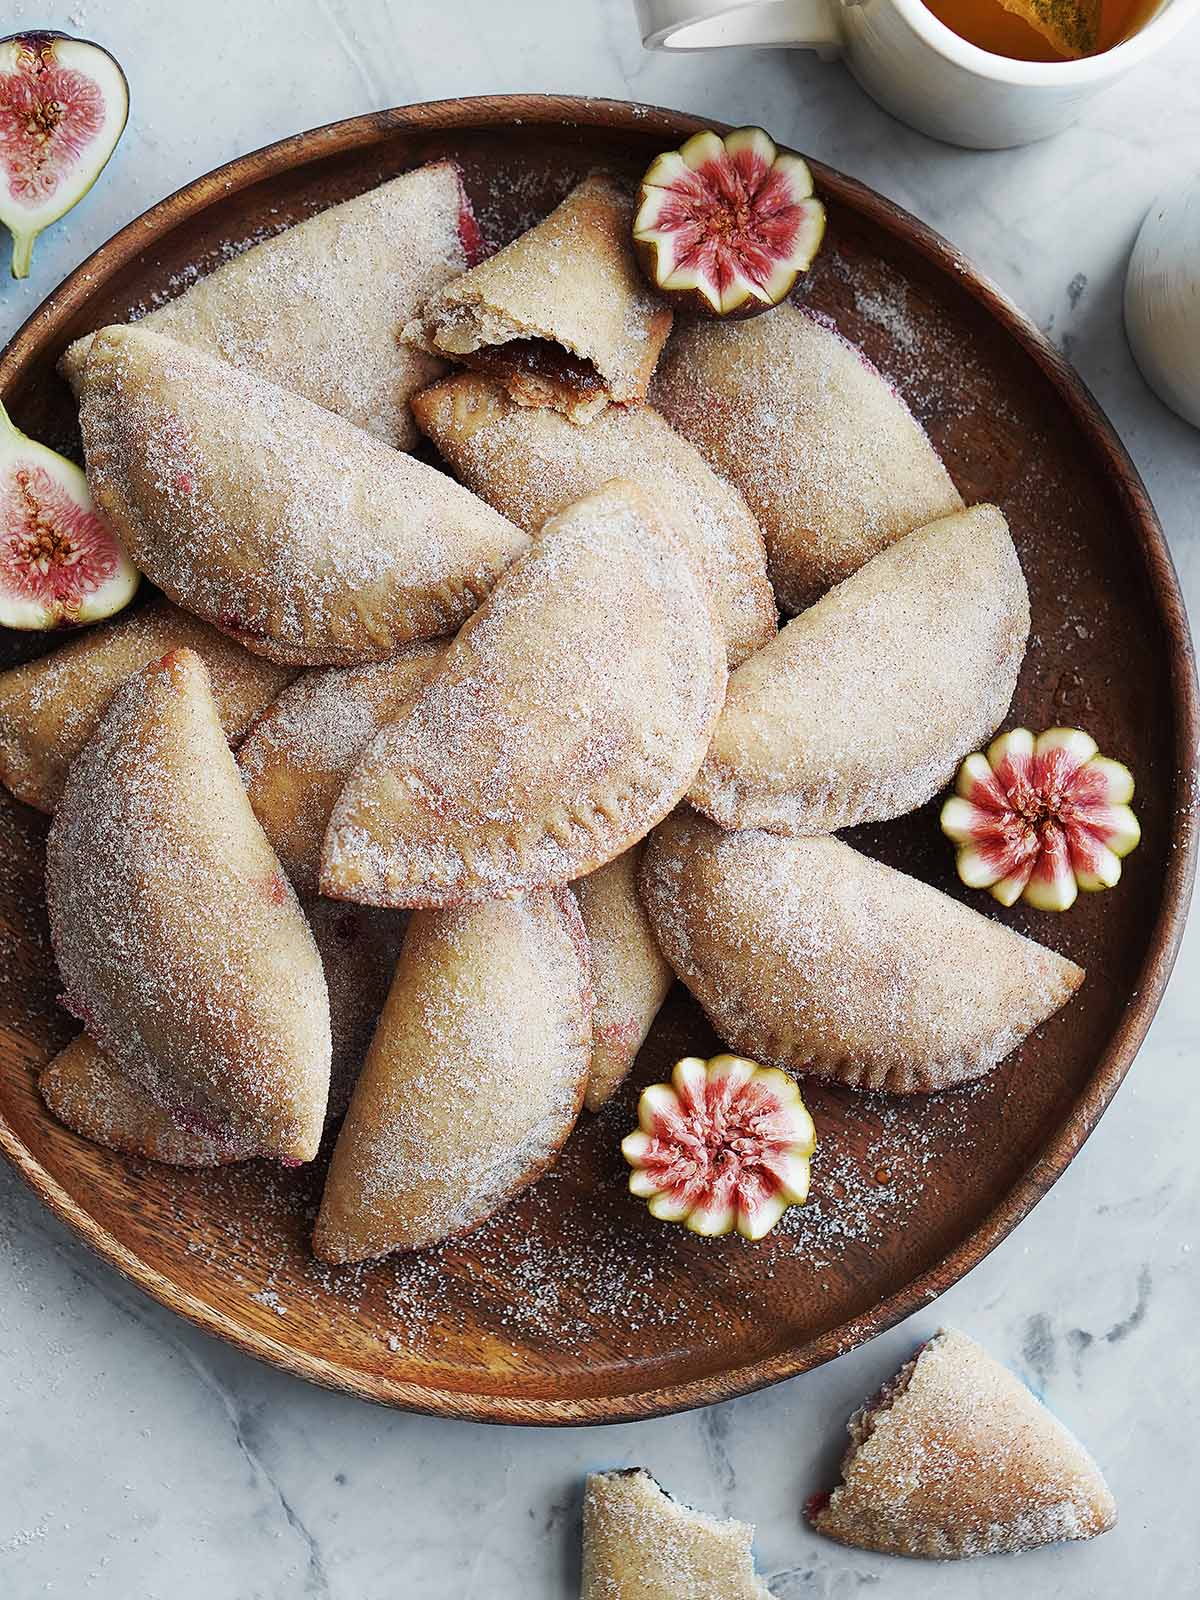 Sweet Empanadas on a serving tray with cut figs on the side.